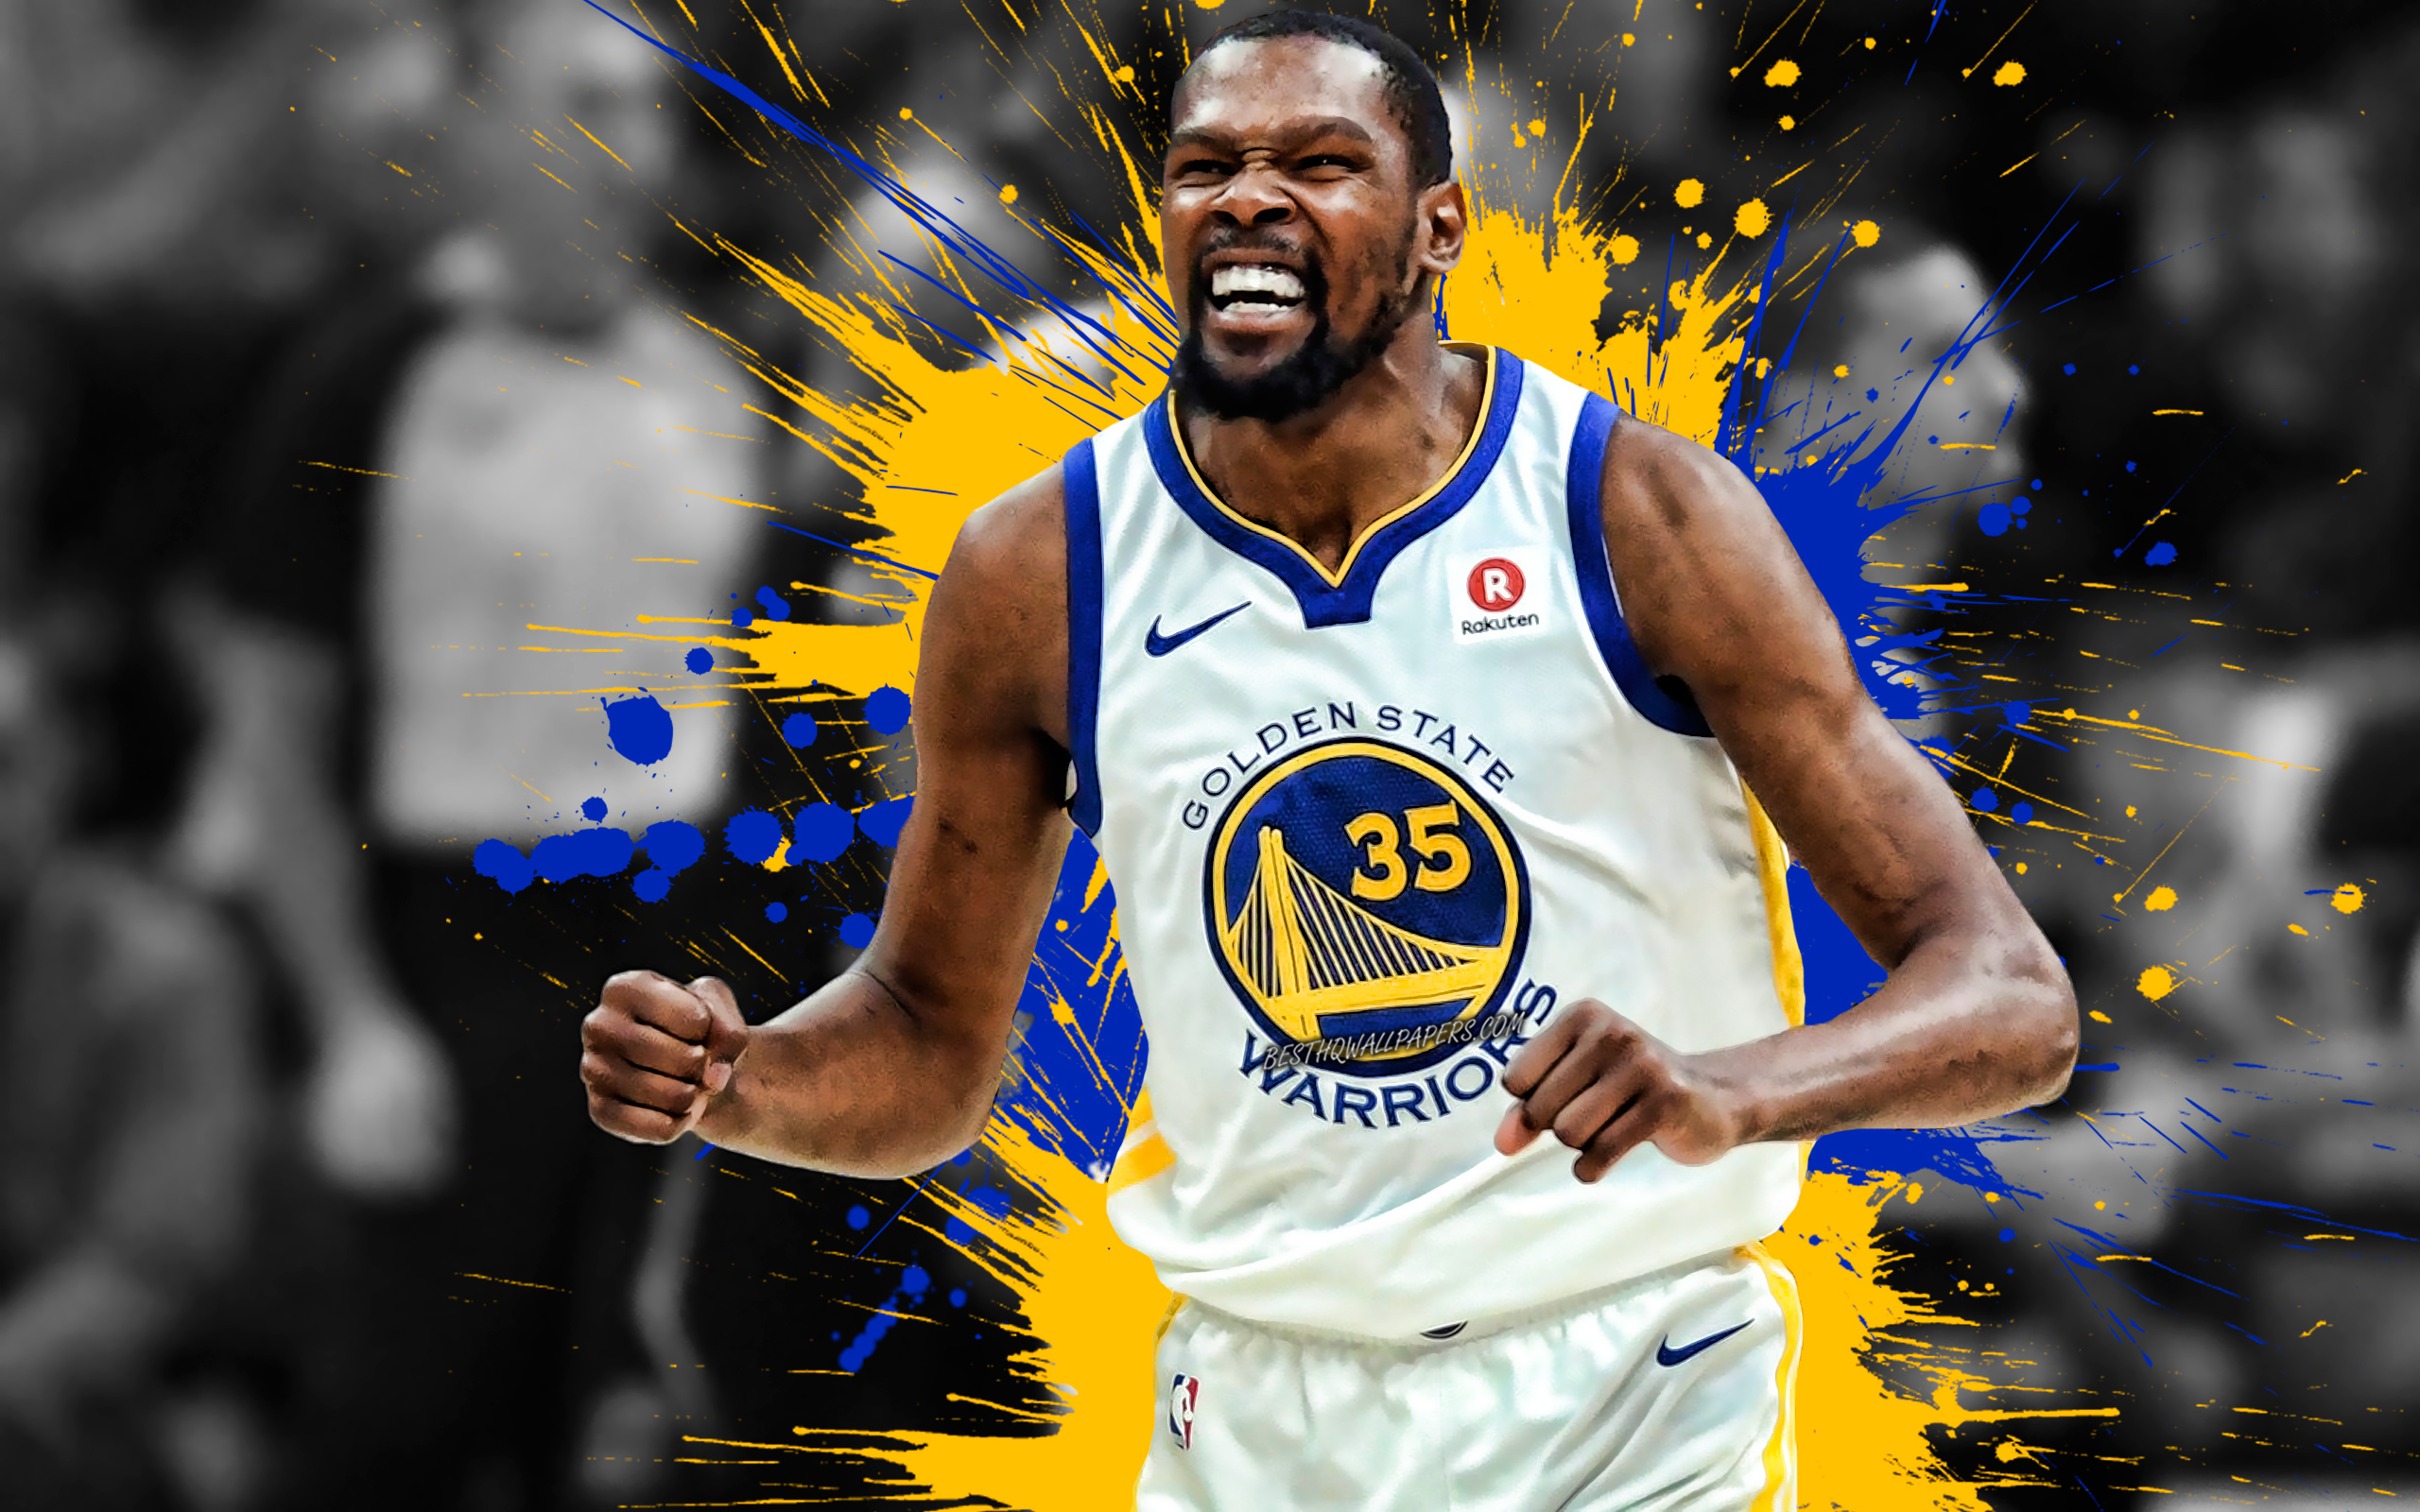 Download wallpaper Kevin Durant, American basketball player, Golden State Warriors, blue yellow paint splashes, creative art, NBA, USA, basketball, National Basketball Association, grunge for desktop with resolution 2560x1600. High Quality HD picture